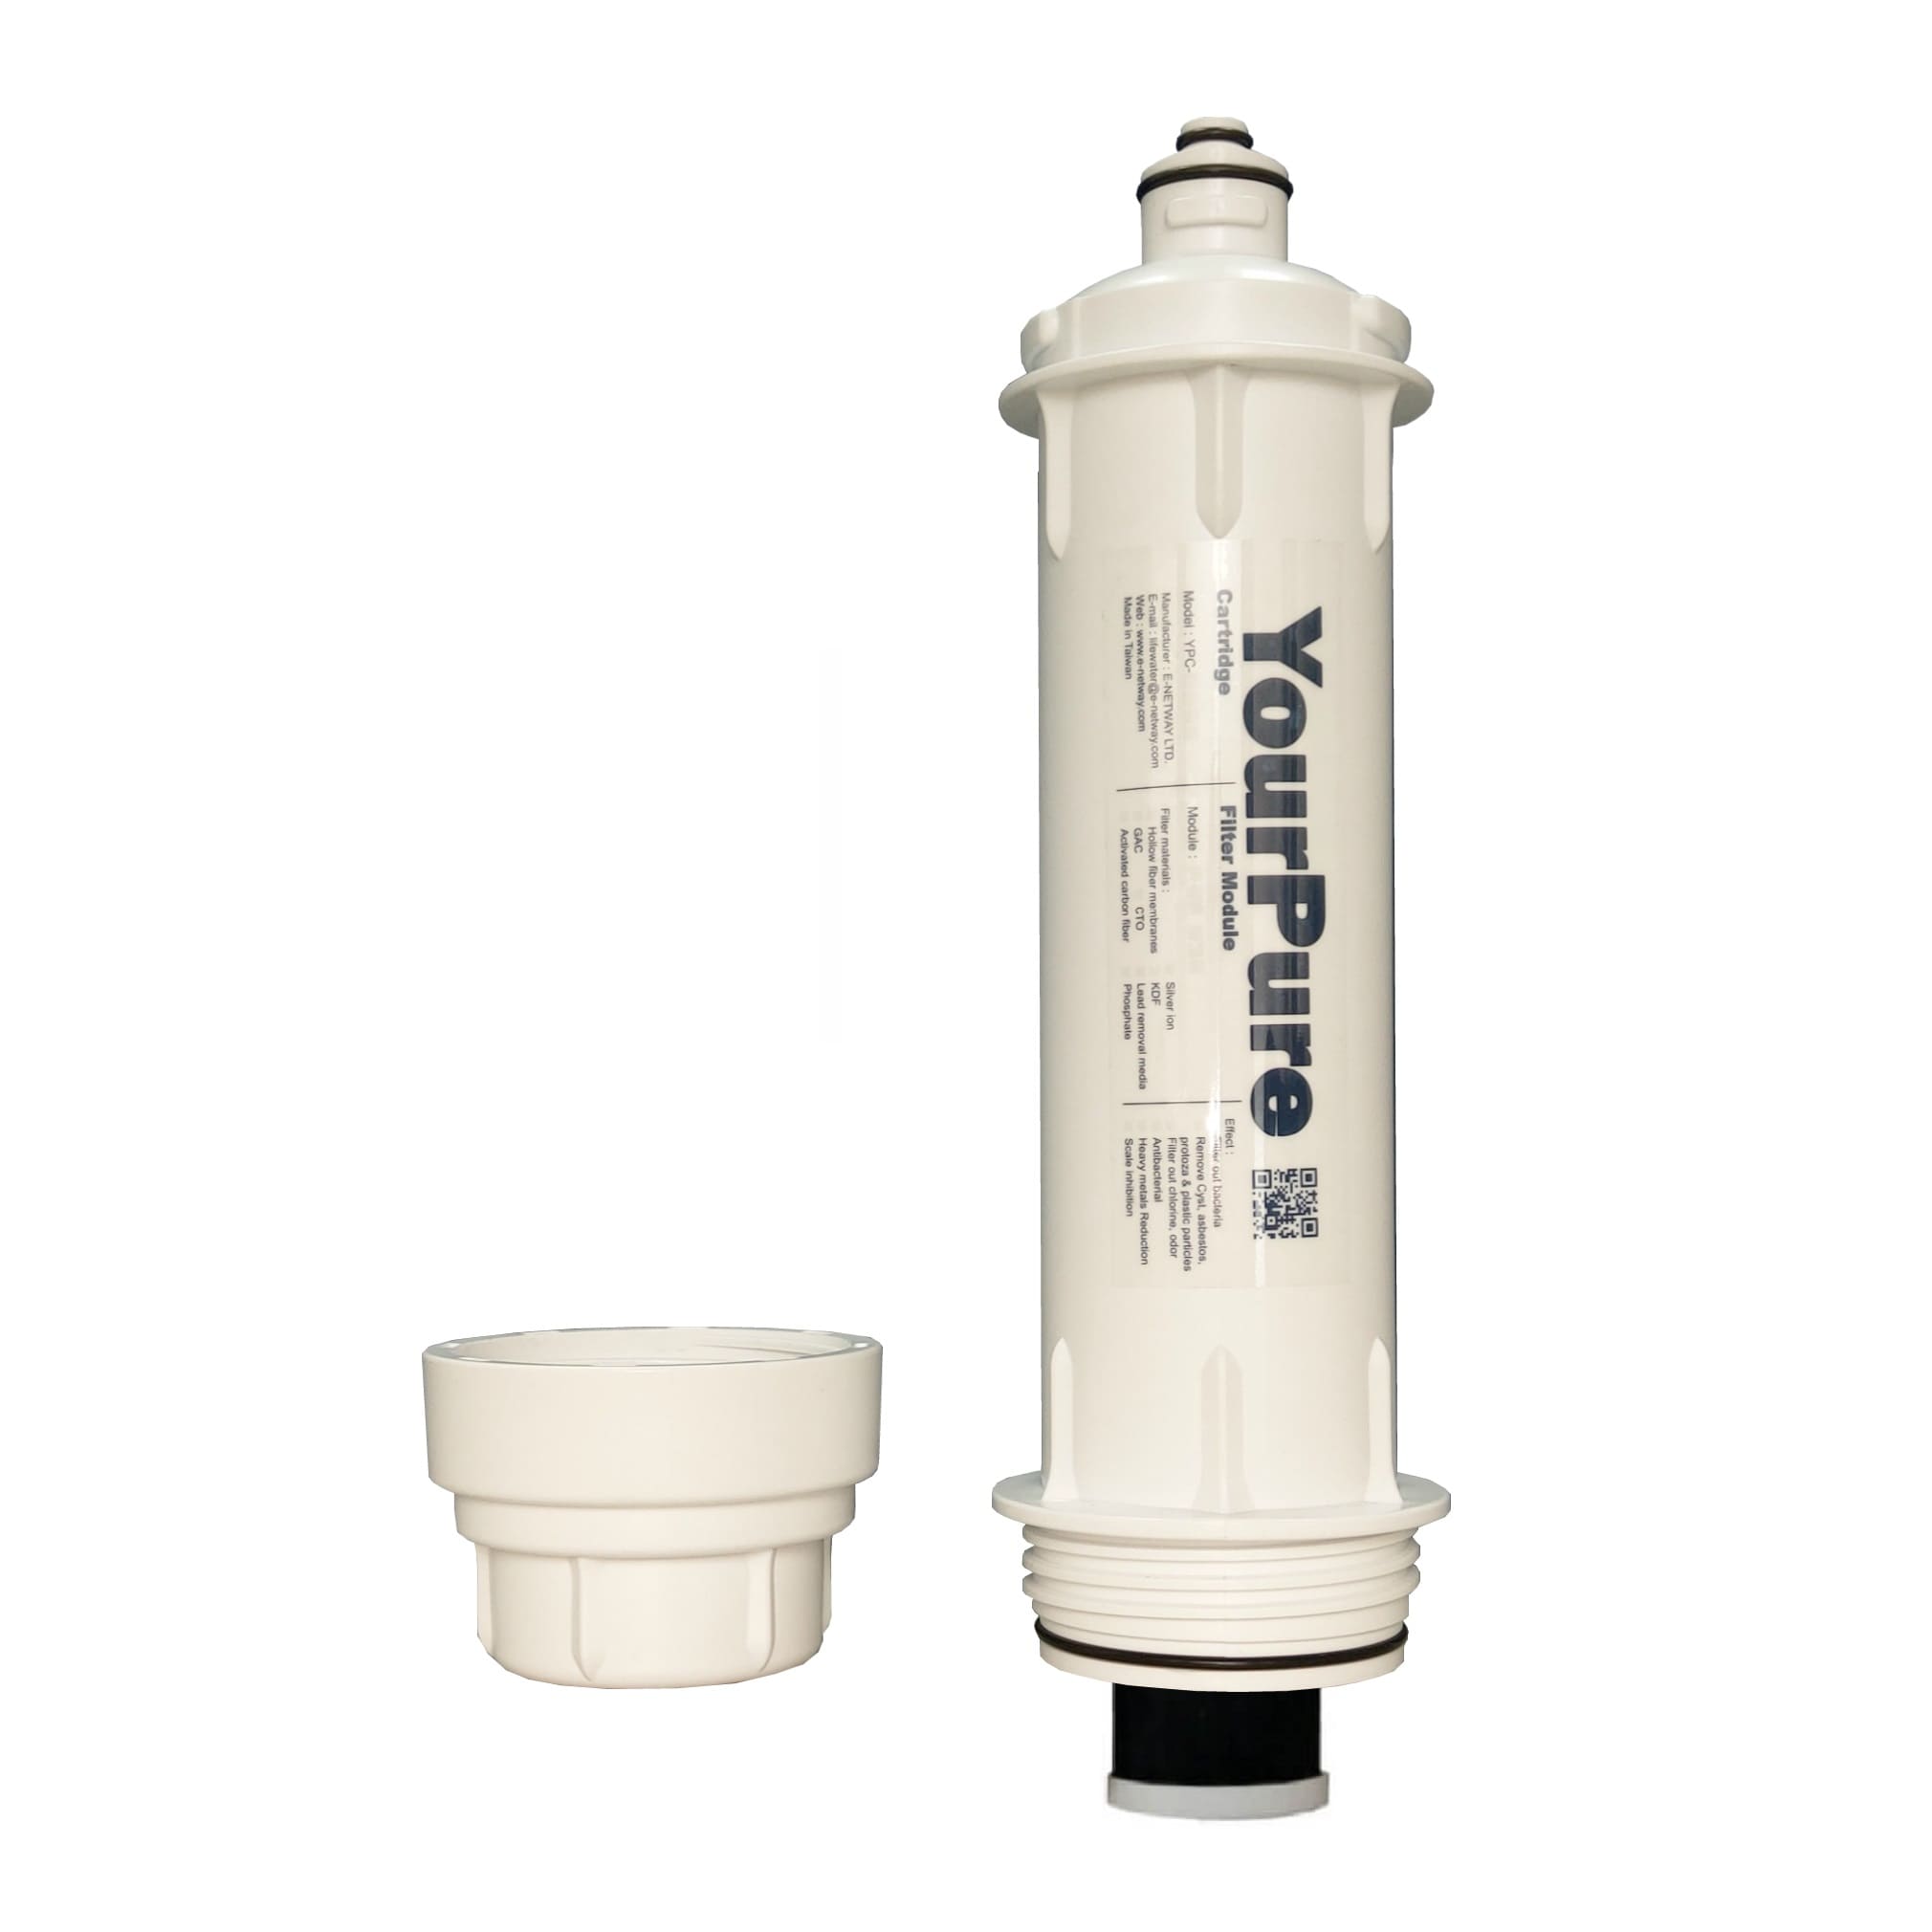 Quick-release water purifier for chlorine and lead removal